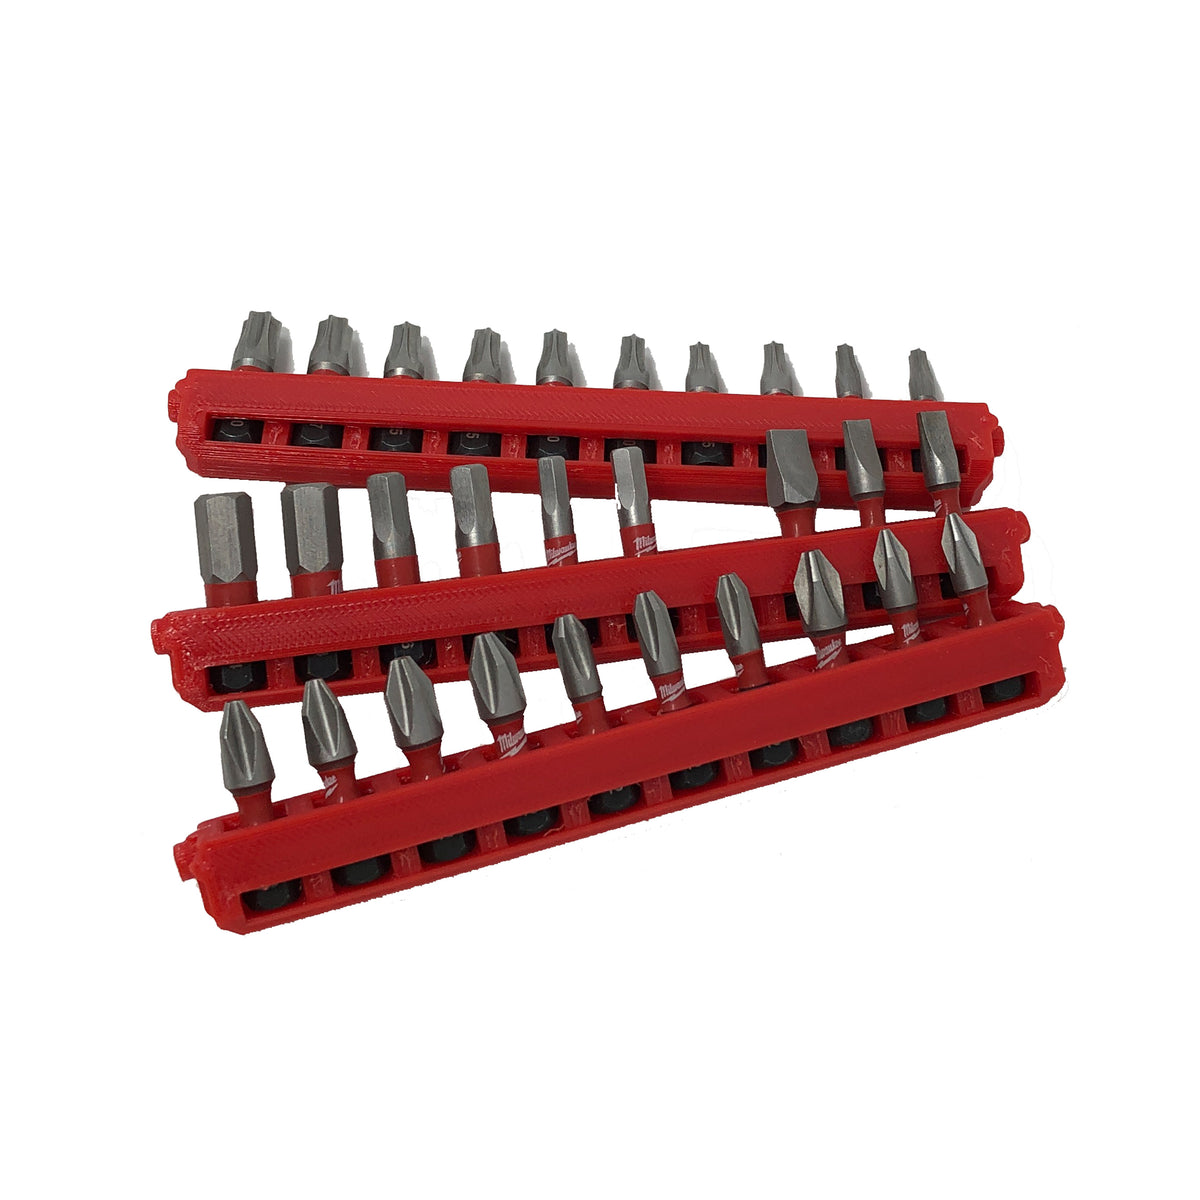 Packout Drawer Bit Holders